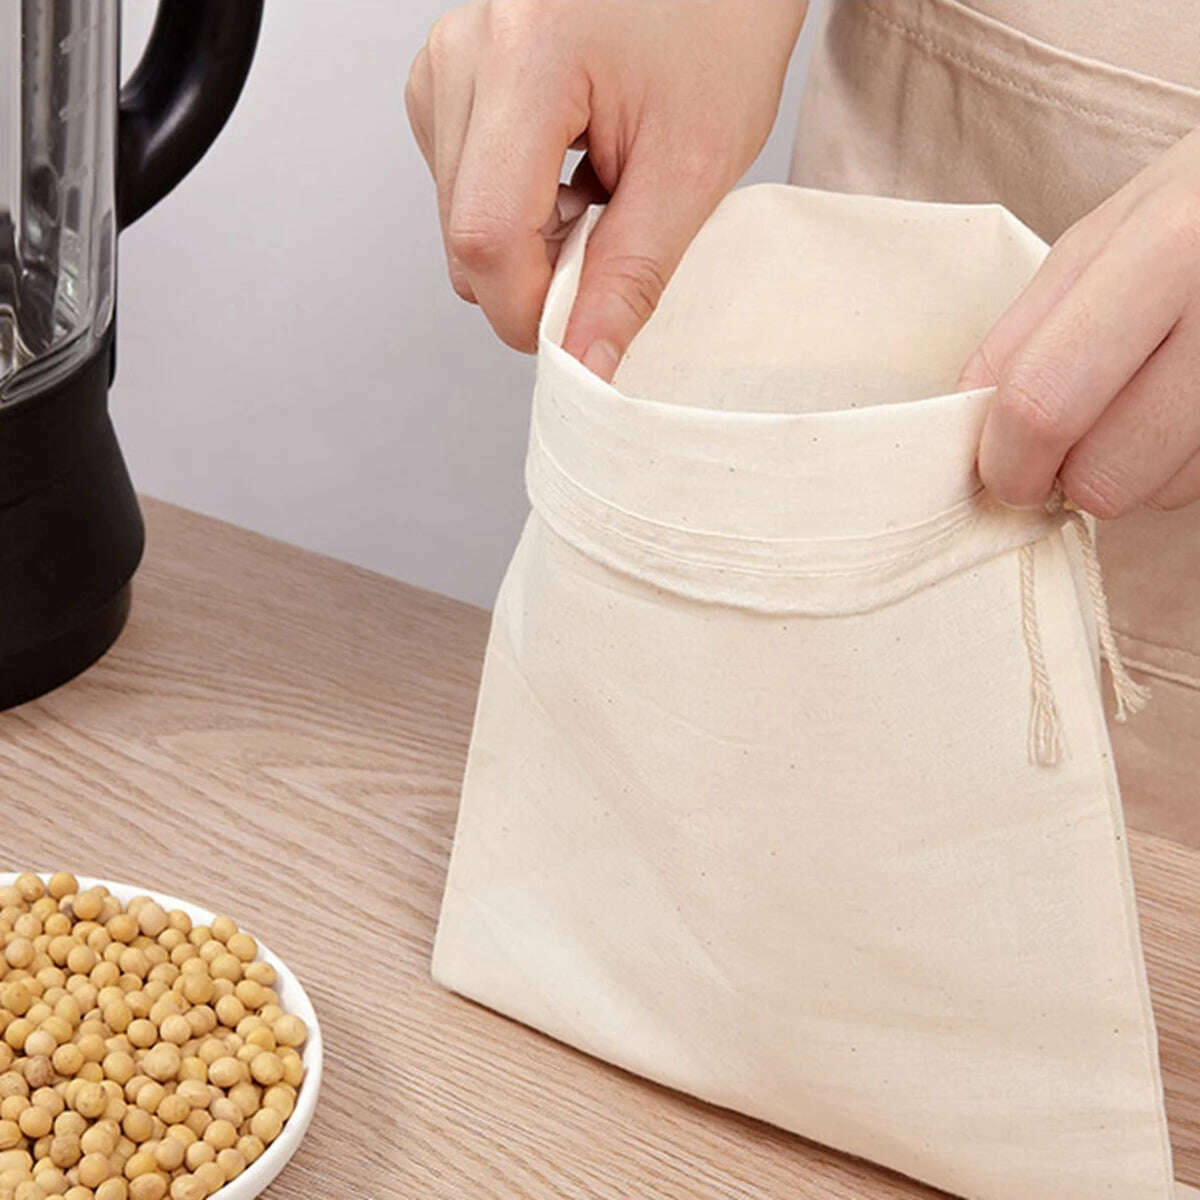 KIMLUD, Reusable Nut Milk Bags Strainers Unbleached Natural Cotton Cheesecloth Bag Food Cheese Yogurt Filter Kitchen Fine Mesh Strainer, KIMLUD Women's Clothes